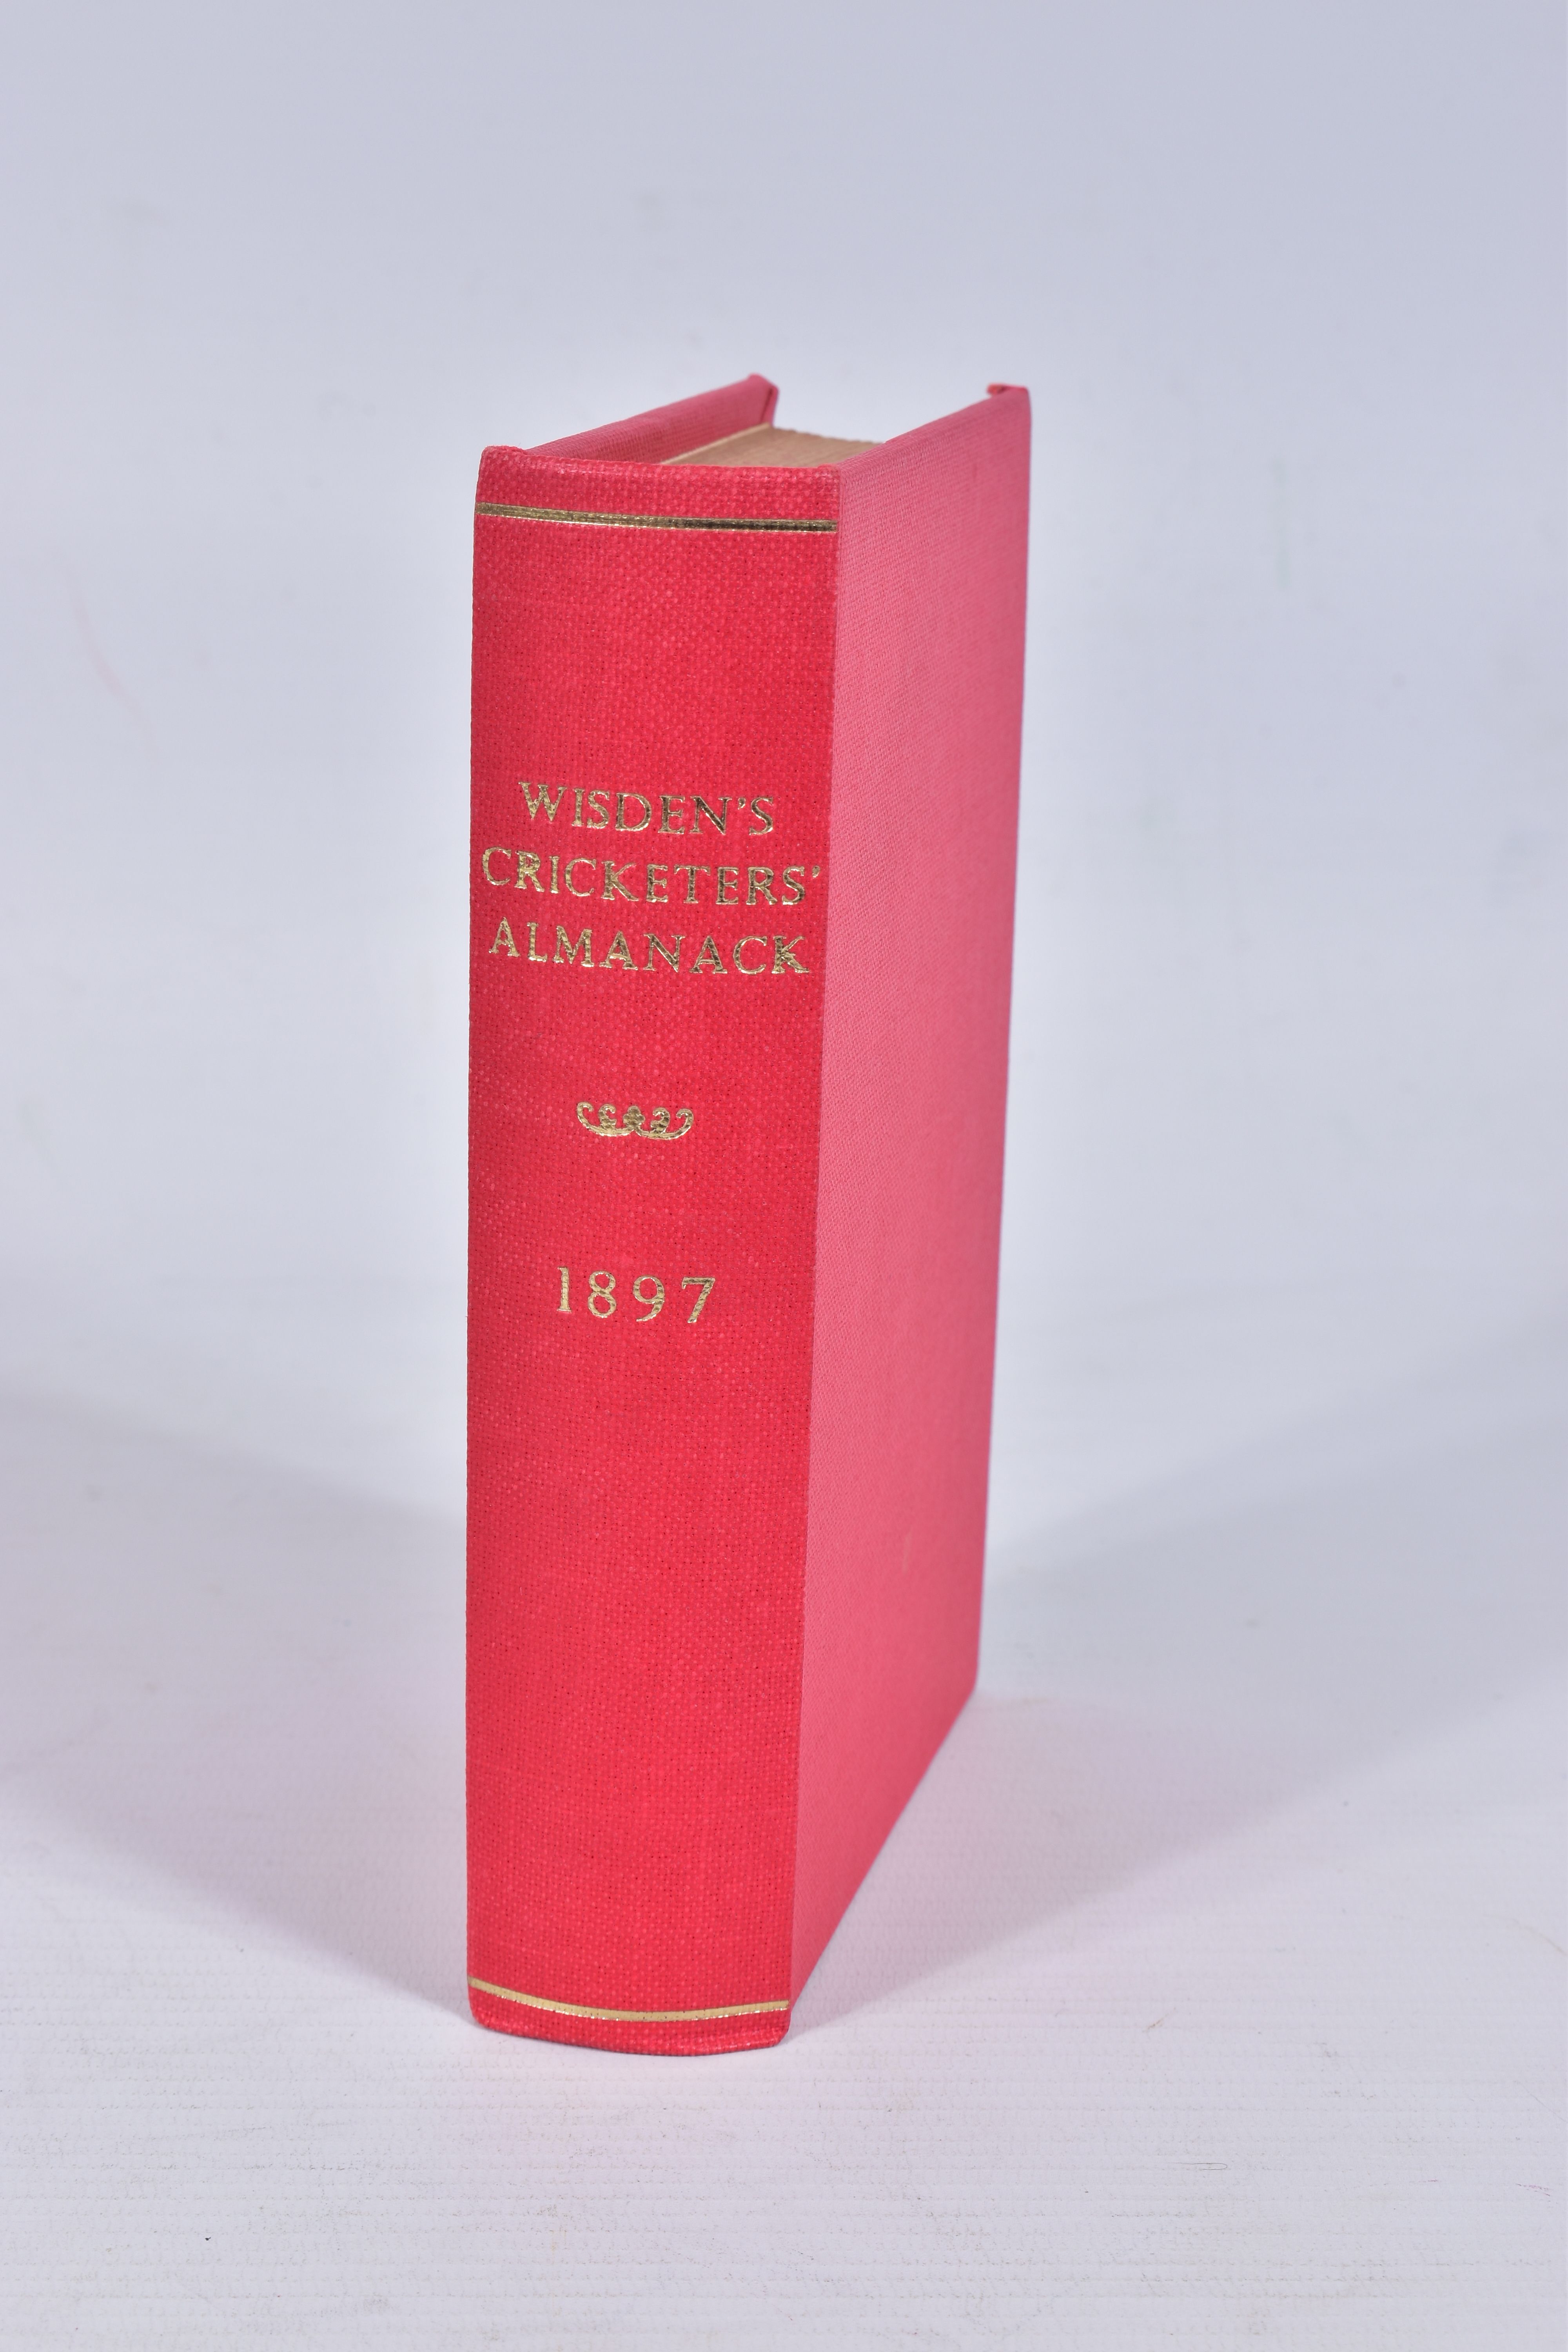 WISDEN; John Wisden's Cricketers' Almanack for 1897, 34th edition, photographic plate intact, red